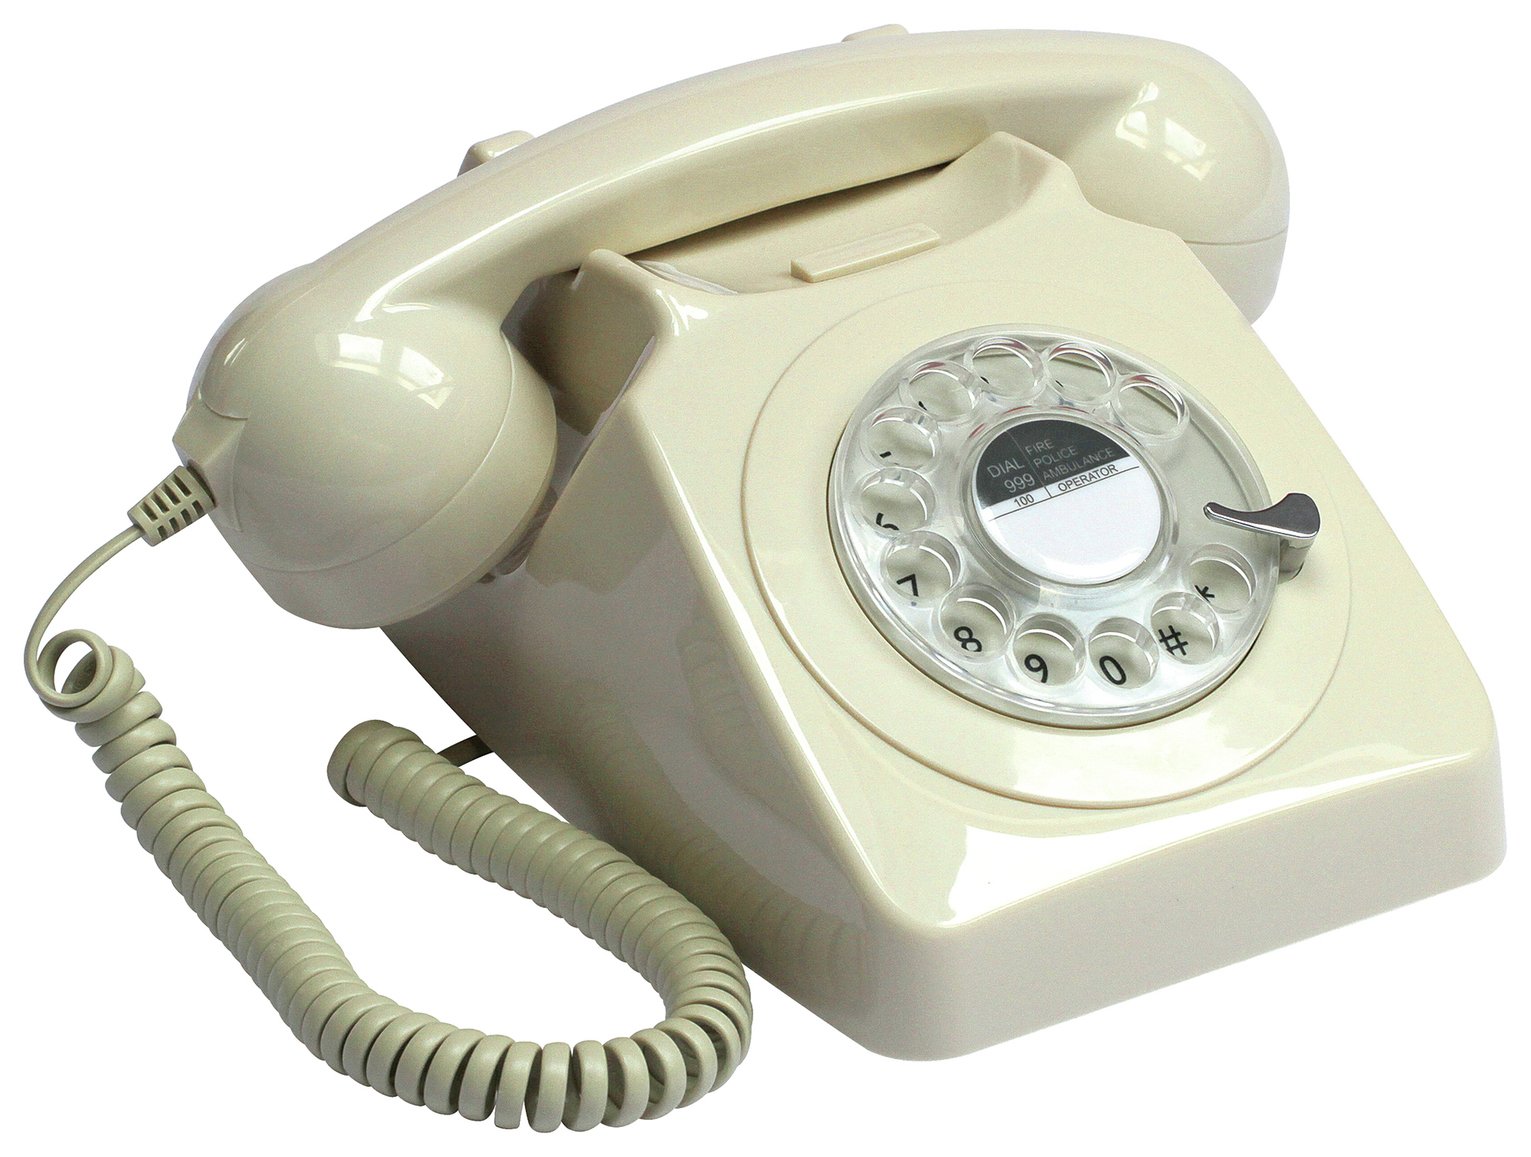 GPO 746 Rotary Dial Phone Review